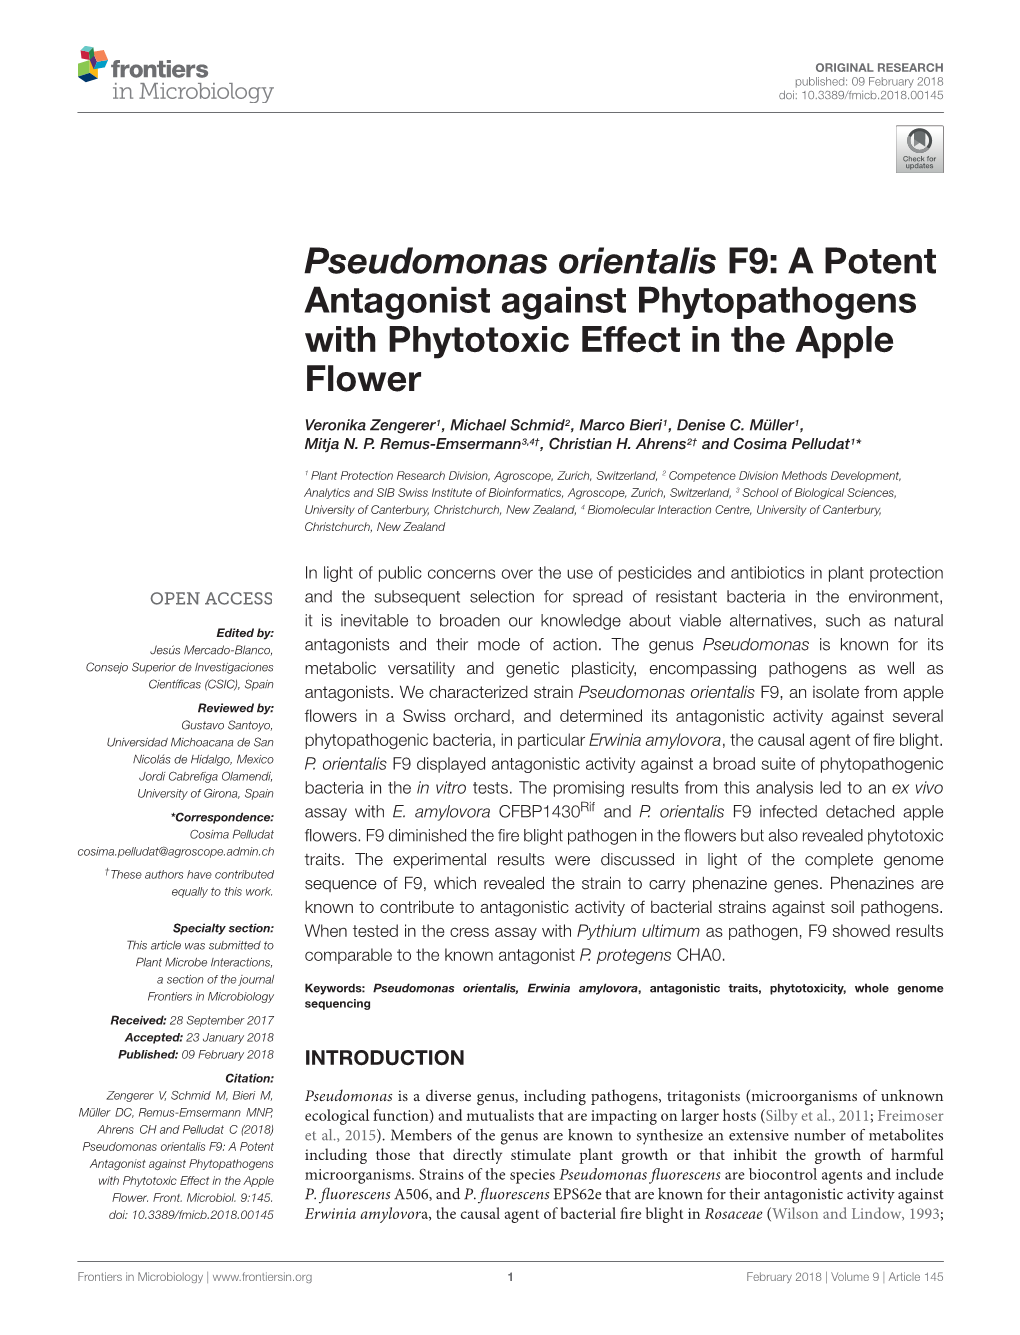 Pseudomonas Orientalis F9: a Potent Antagonist Against Phytopathogens with Phytotoxic Effect in the Apple Flower